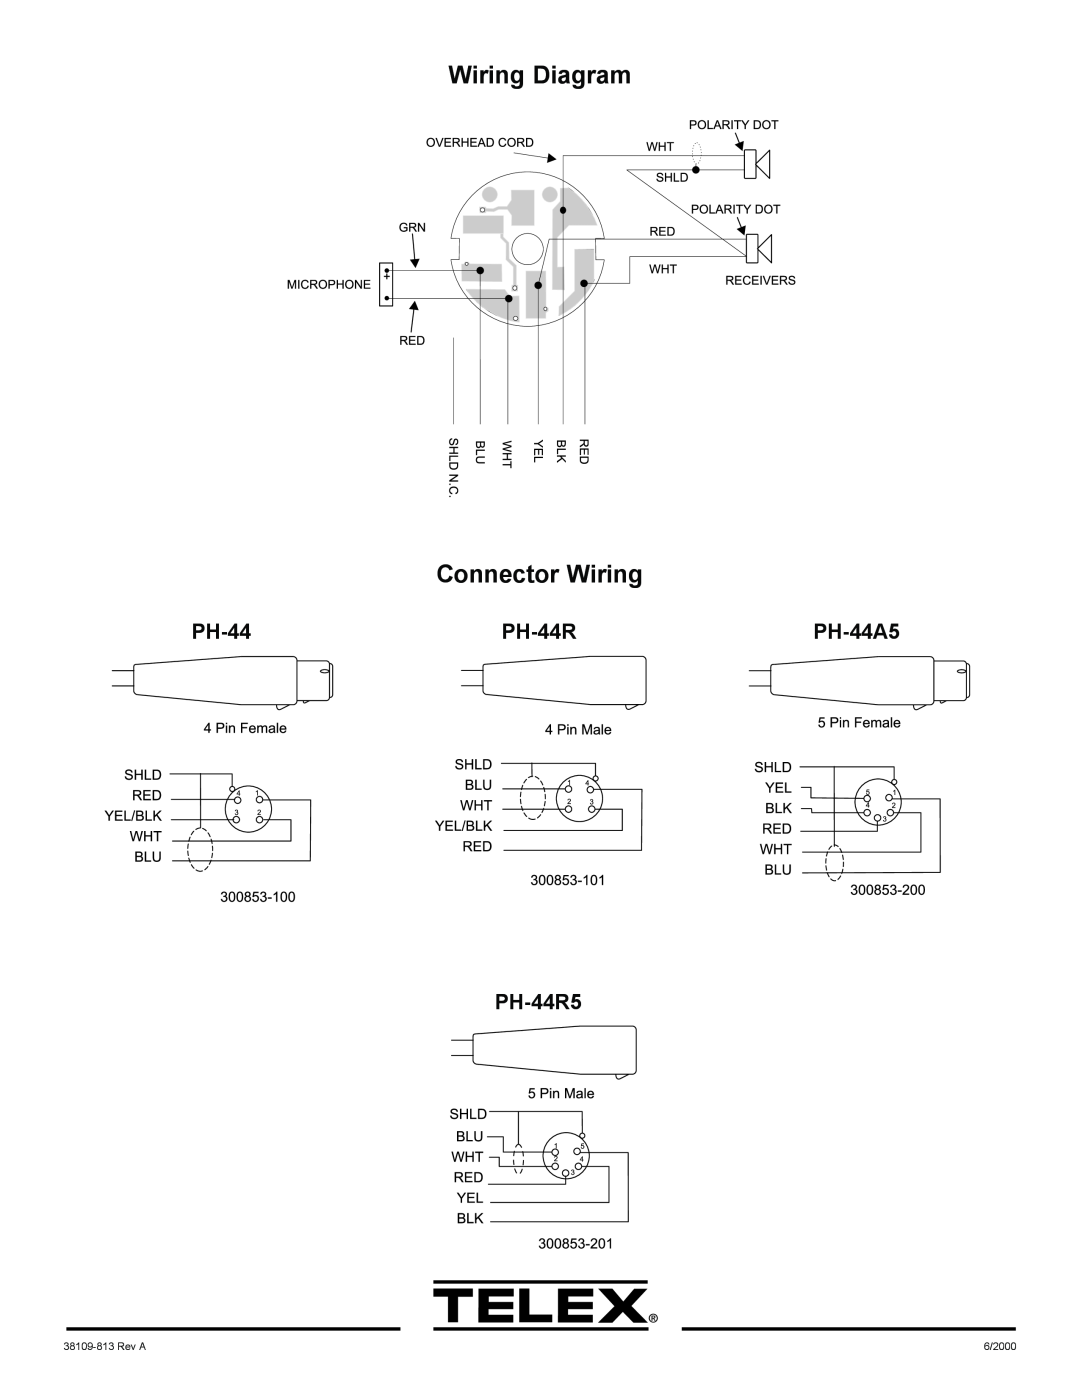 Telex specifications Wiring Diagram Connector Wiring, PH-44A5, PH-44R5, 38109-813Rev A, 6/2000 